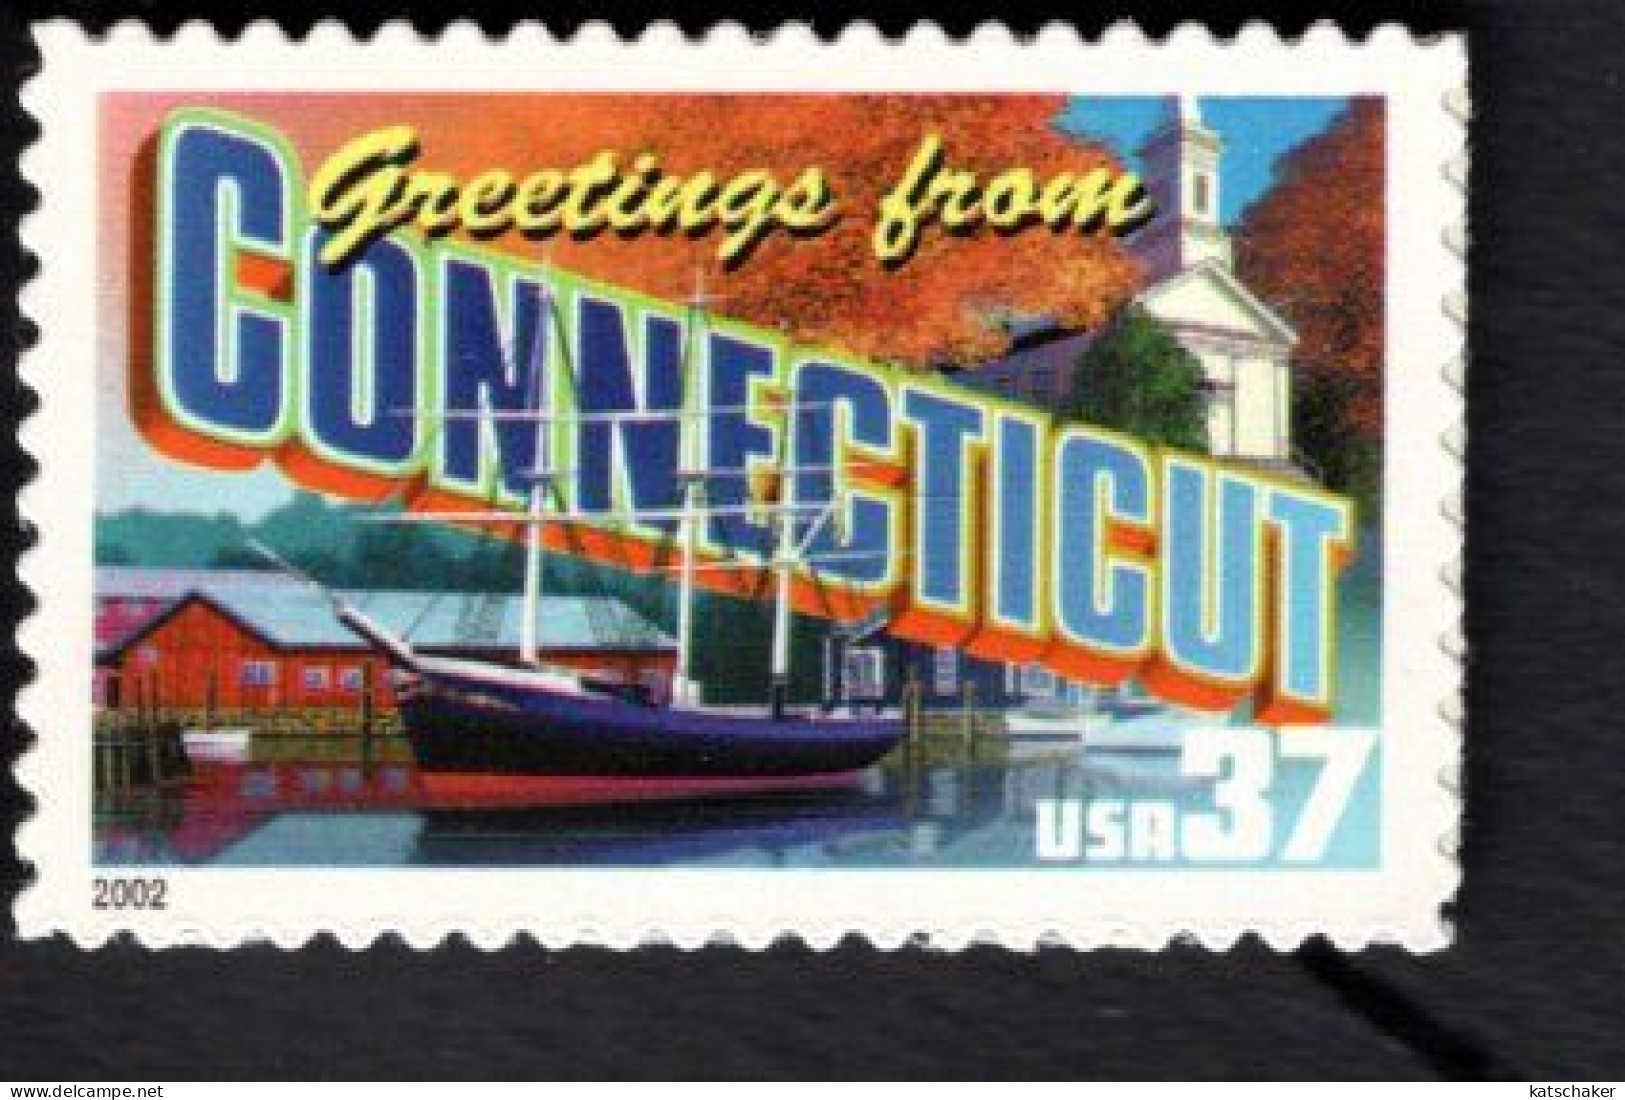 2017228952  2002  SCOTT 3702 (XX) POSTFRIS MINT NEVER HINGED - GREETINGS FROM AMERICA - CONNECTICUT - Nuevos